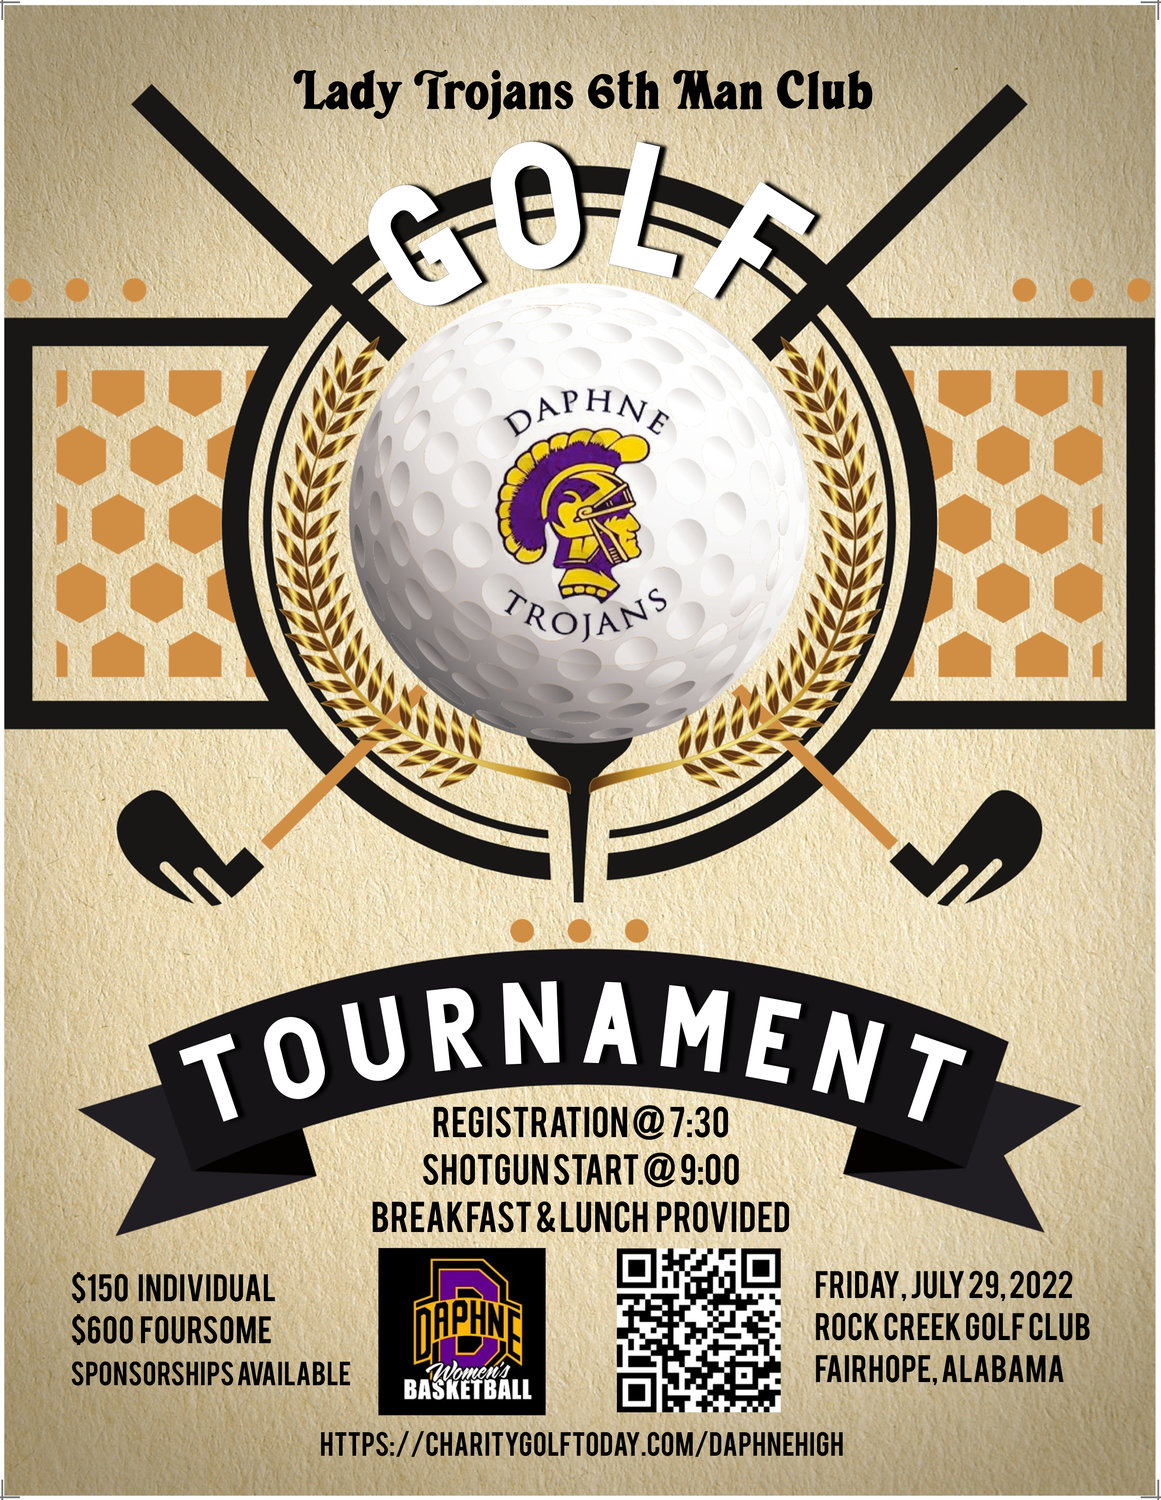 Visit charitygolftoday.com/daphnehigh to register for the inaugural Lady Trojans 6th Man Club Golf Tournament Friday, July 29, at Rock Creek Golf Club in Fairhope.